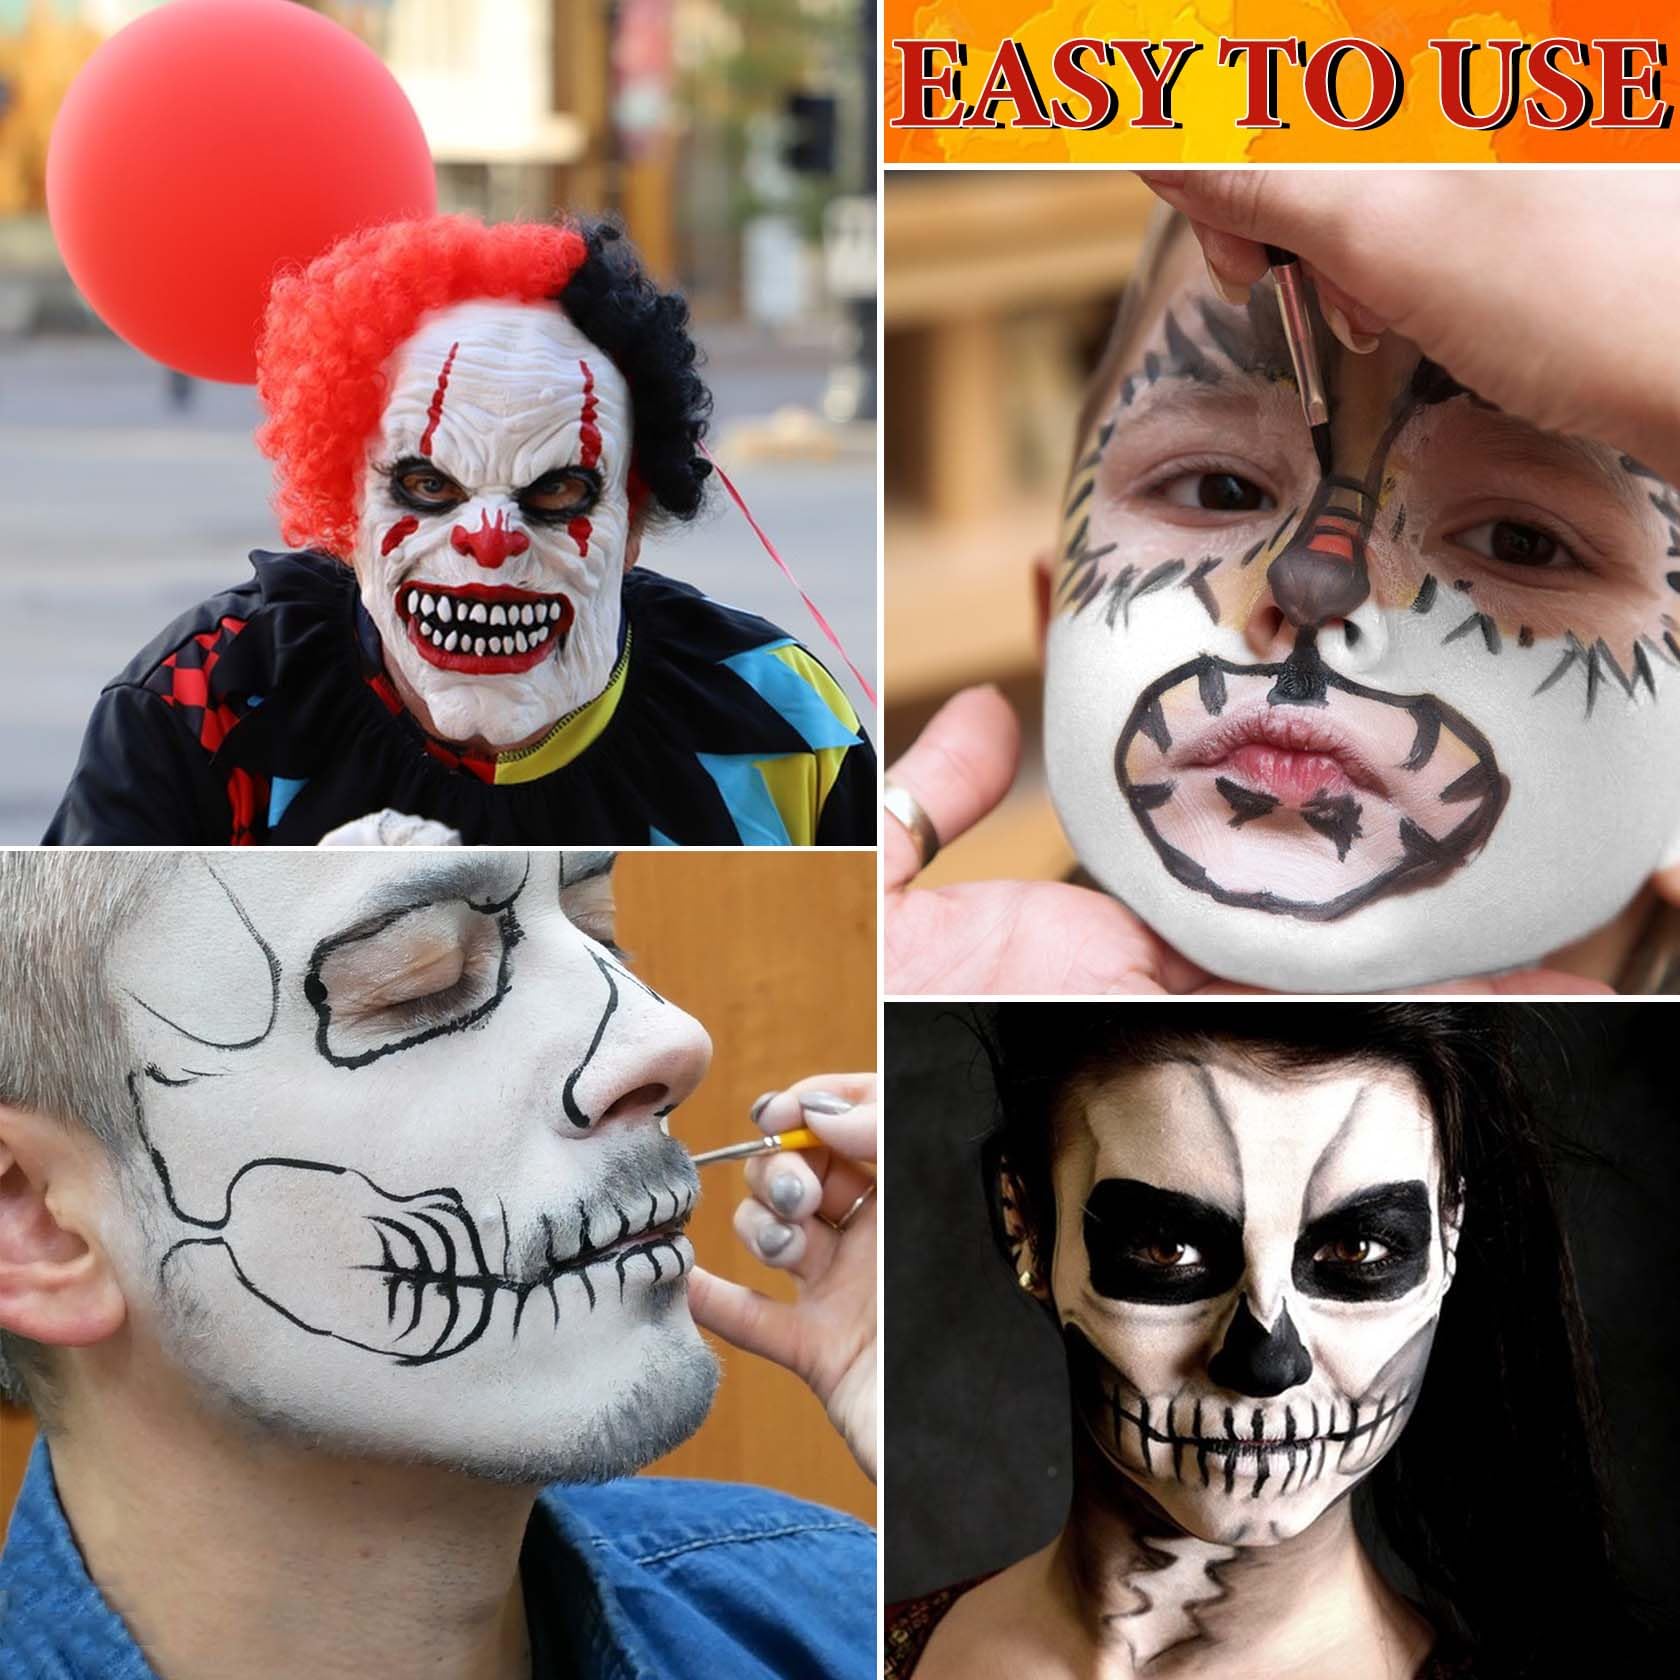 DuoZeng White Red Black Halloween Face Paint Makeup,Professional White Face Paint Clown Joker Cream Makeup Face Painting Kit,Body Paint for Halloween Zombie Costume Stage Cosplay